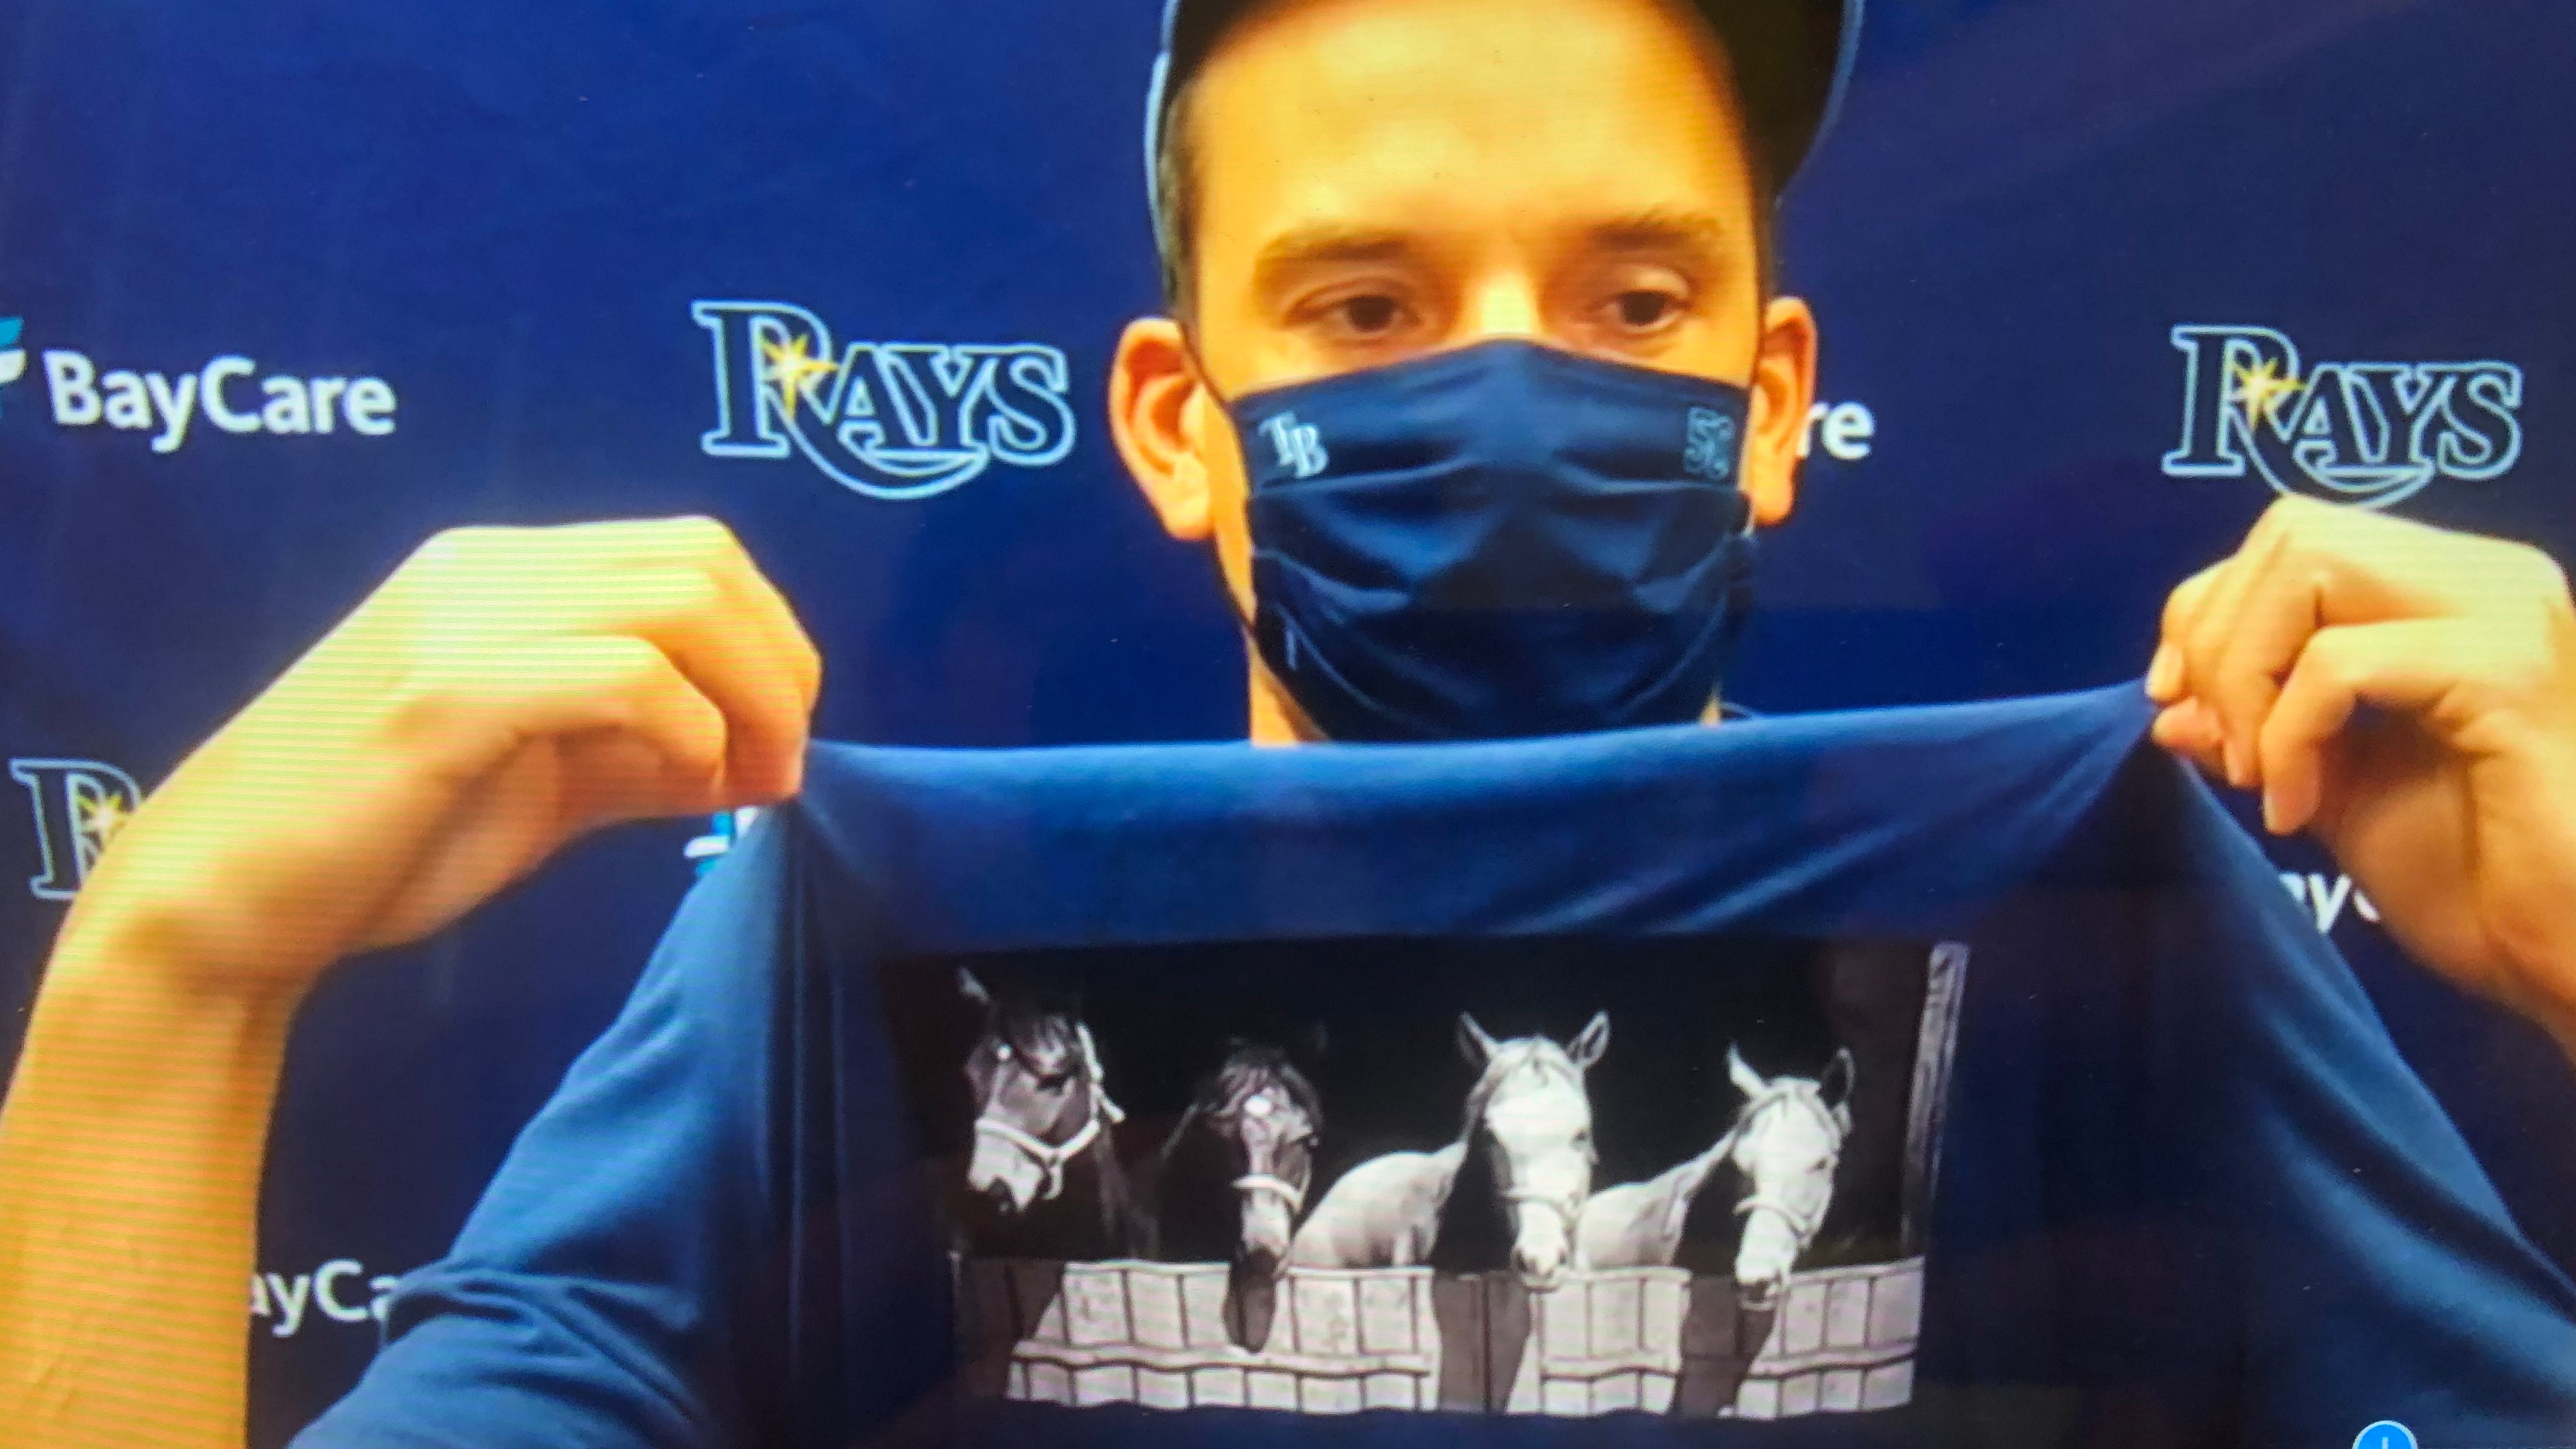 Rays pitchers' new 'stable shirt' won't be a hit with Yankees